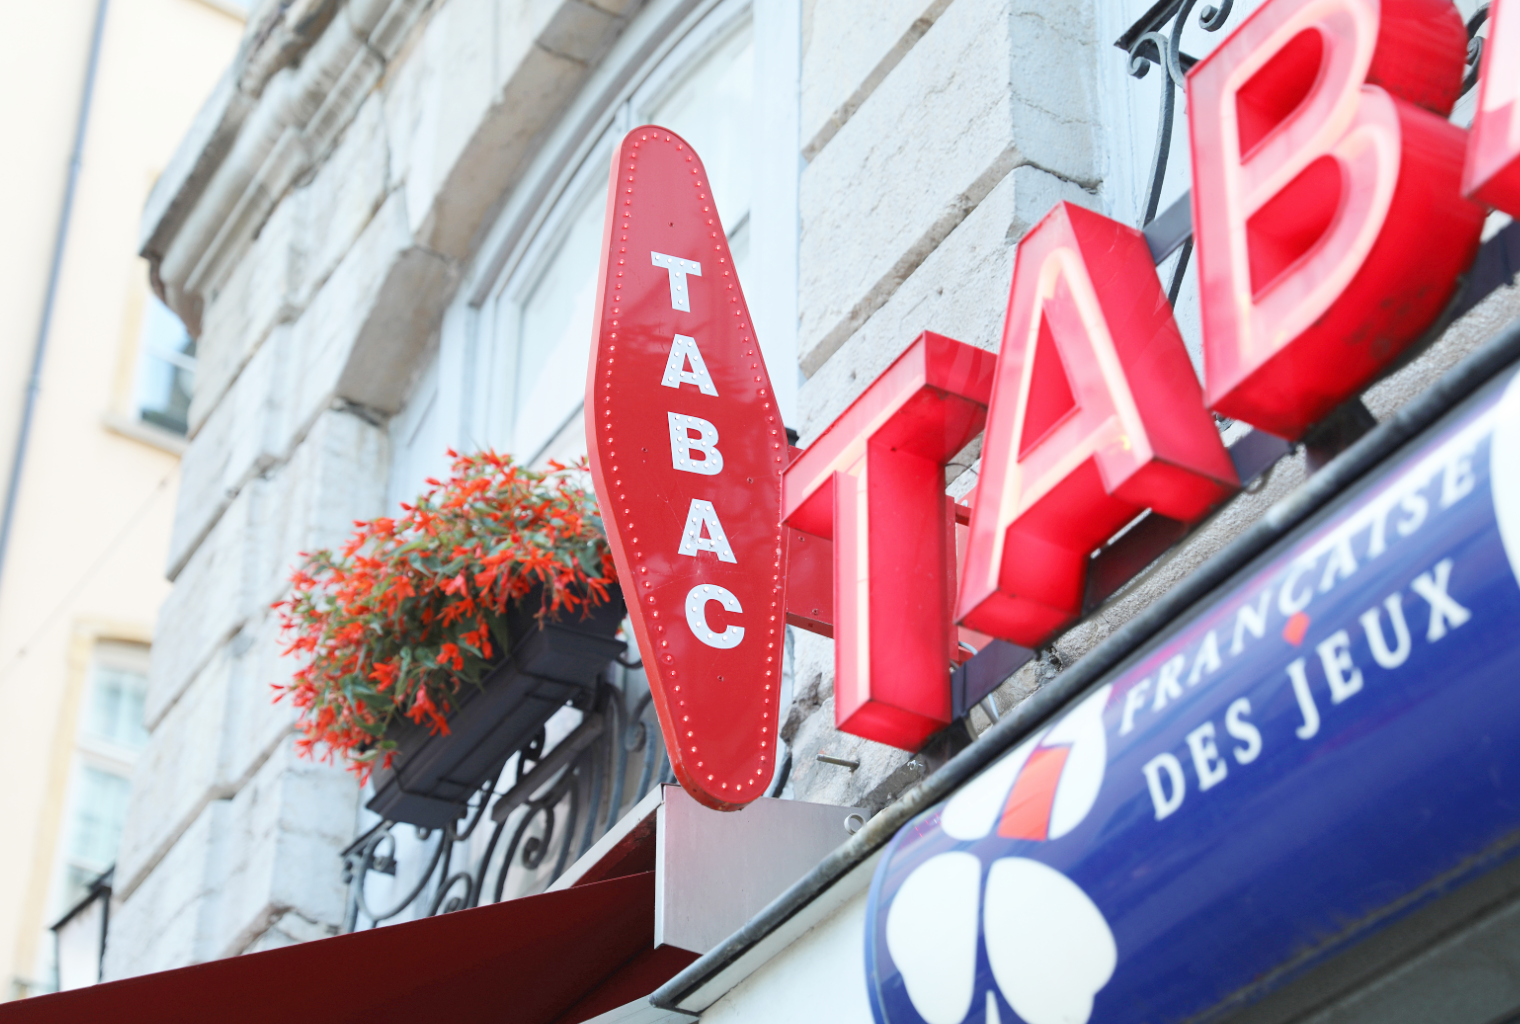 Tabac coutellerie